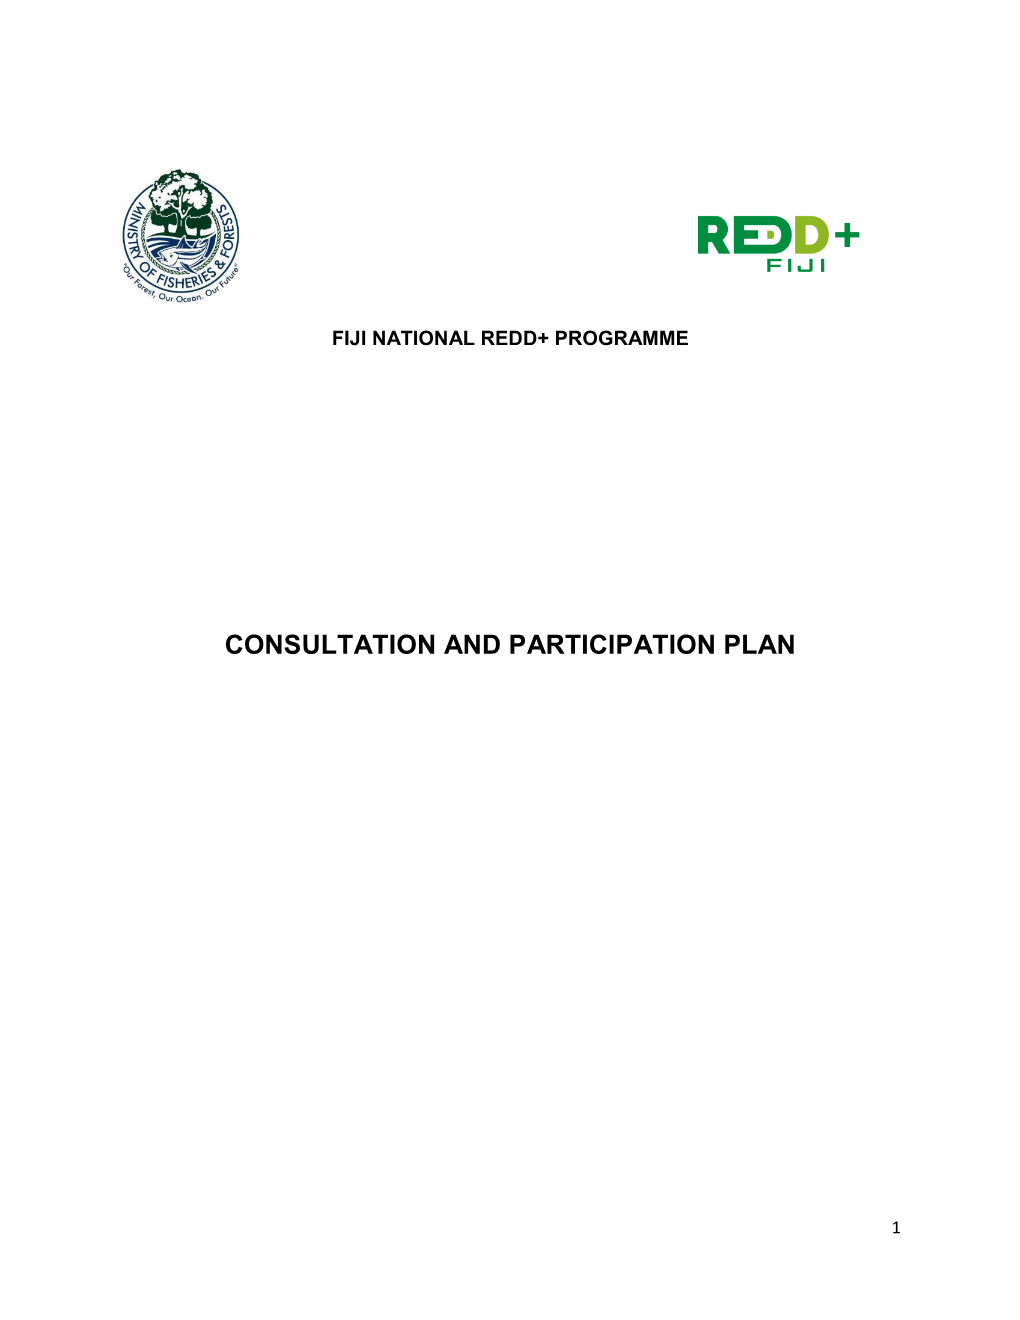 Consultation and Participation Plan